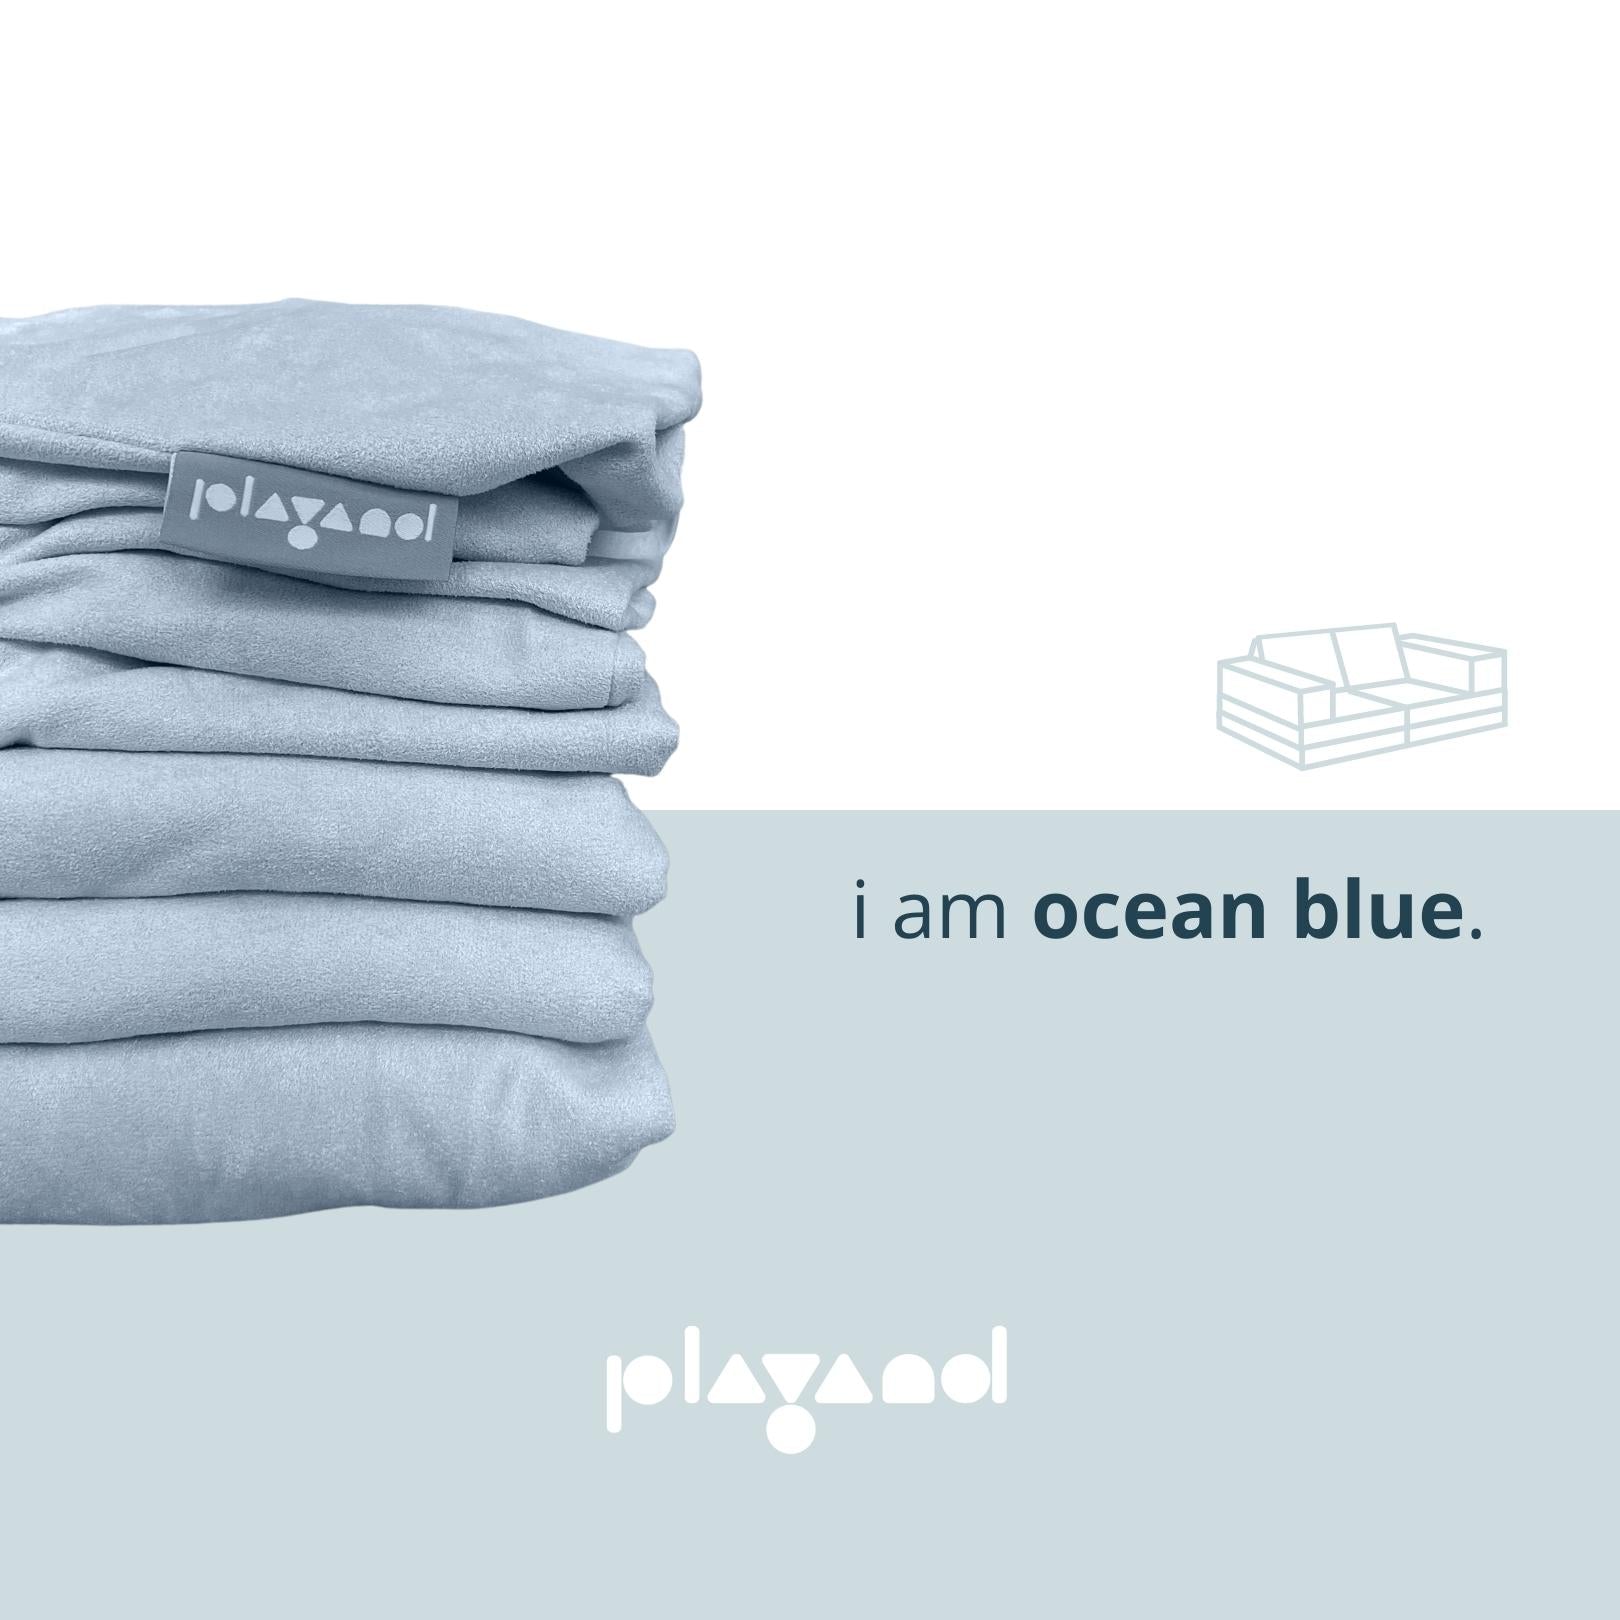 Playand Sofa Series Cover In Ocean Blue